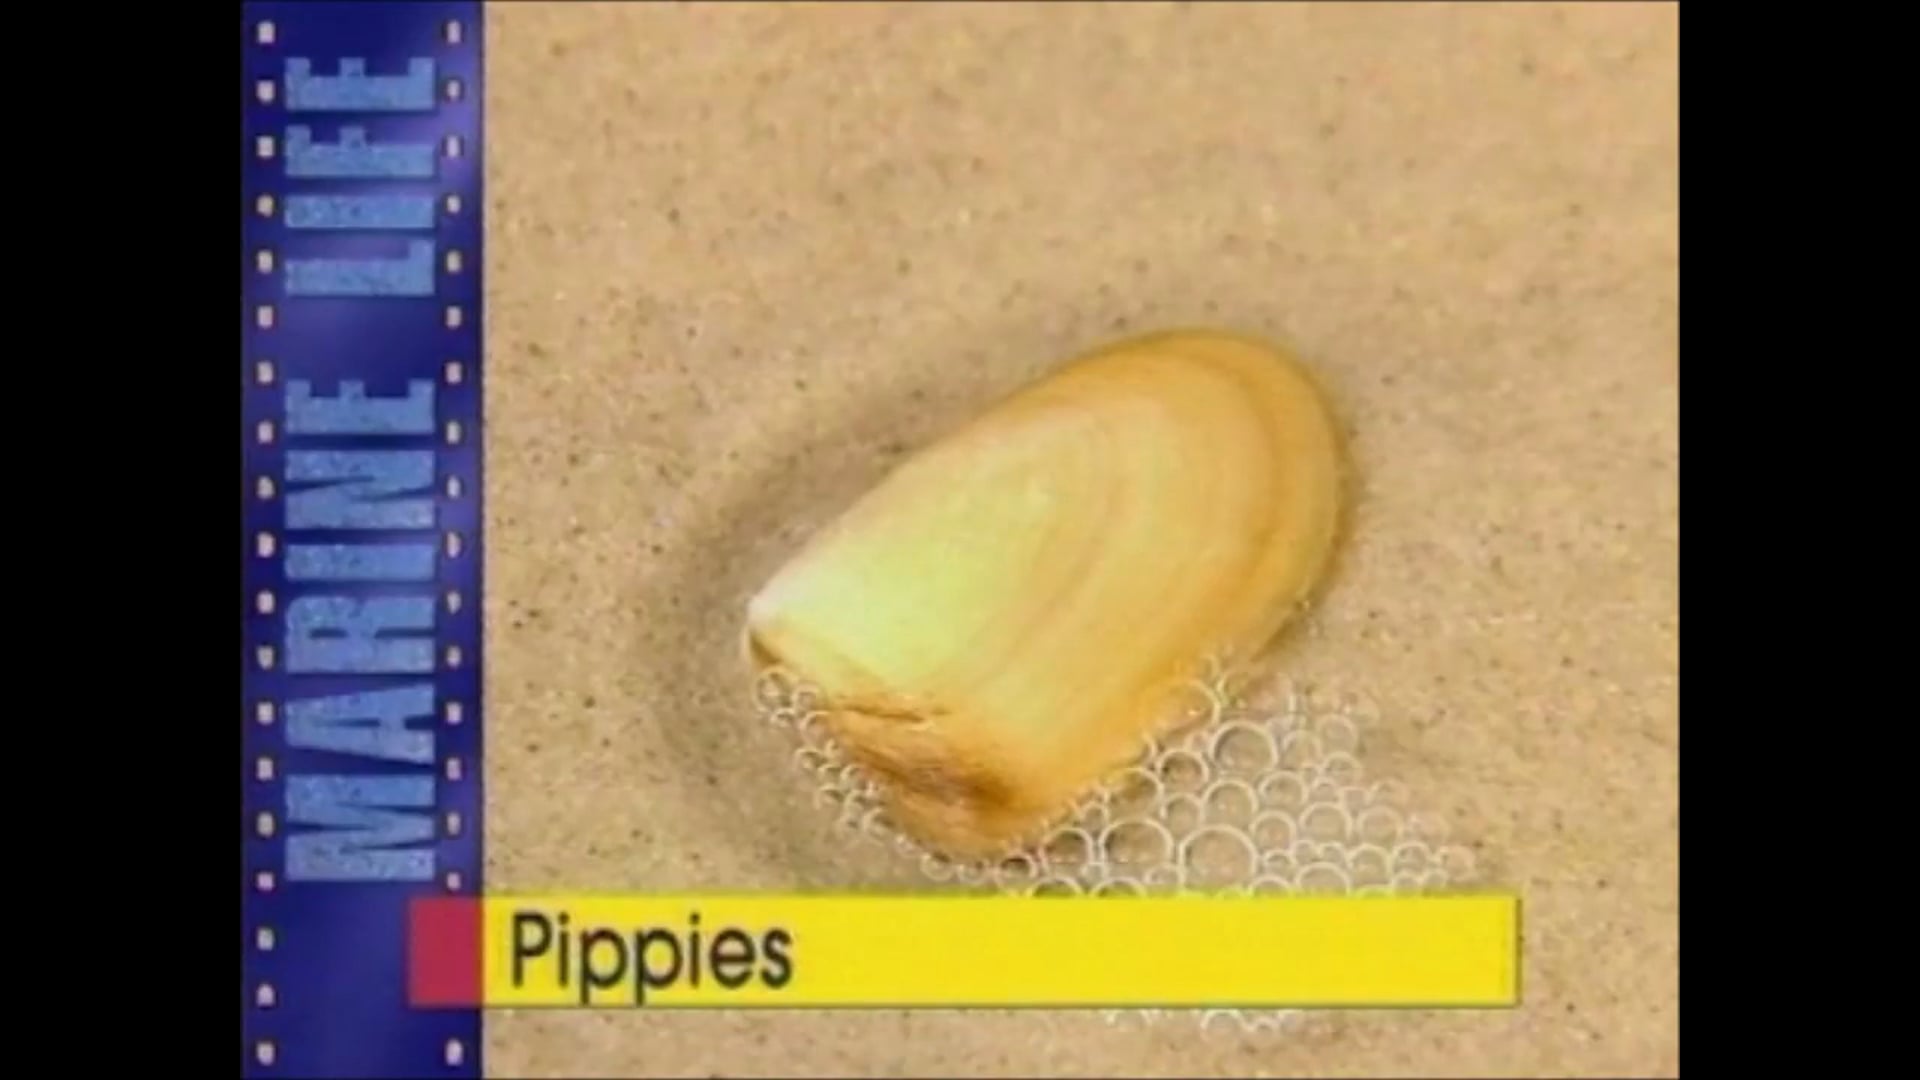 Pippies